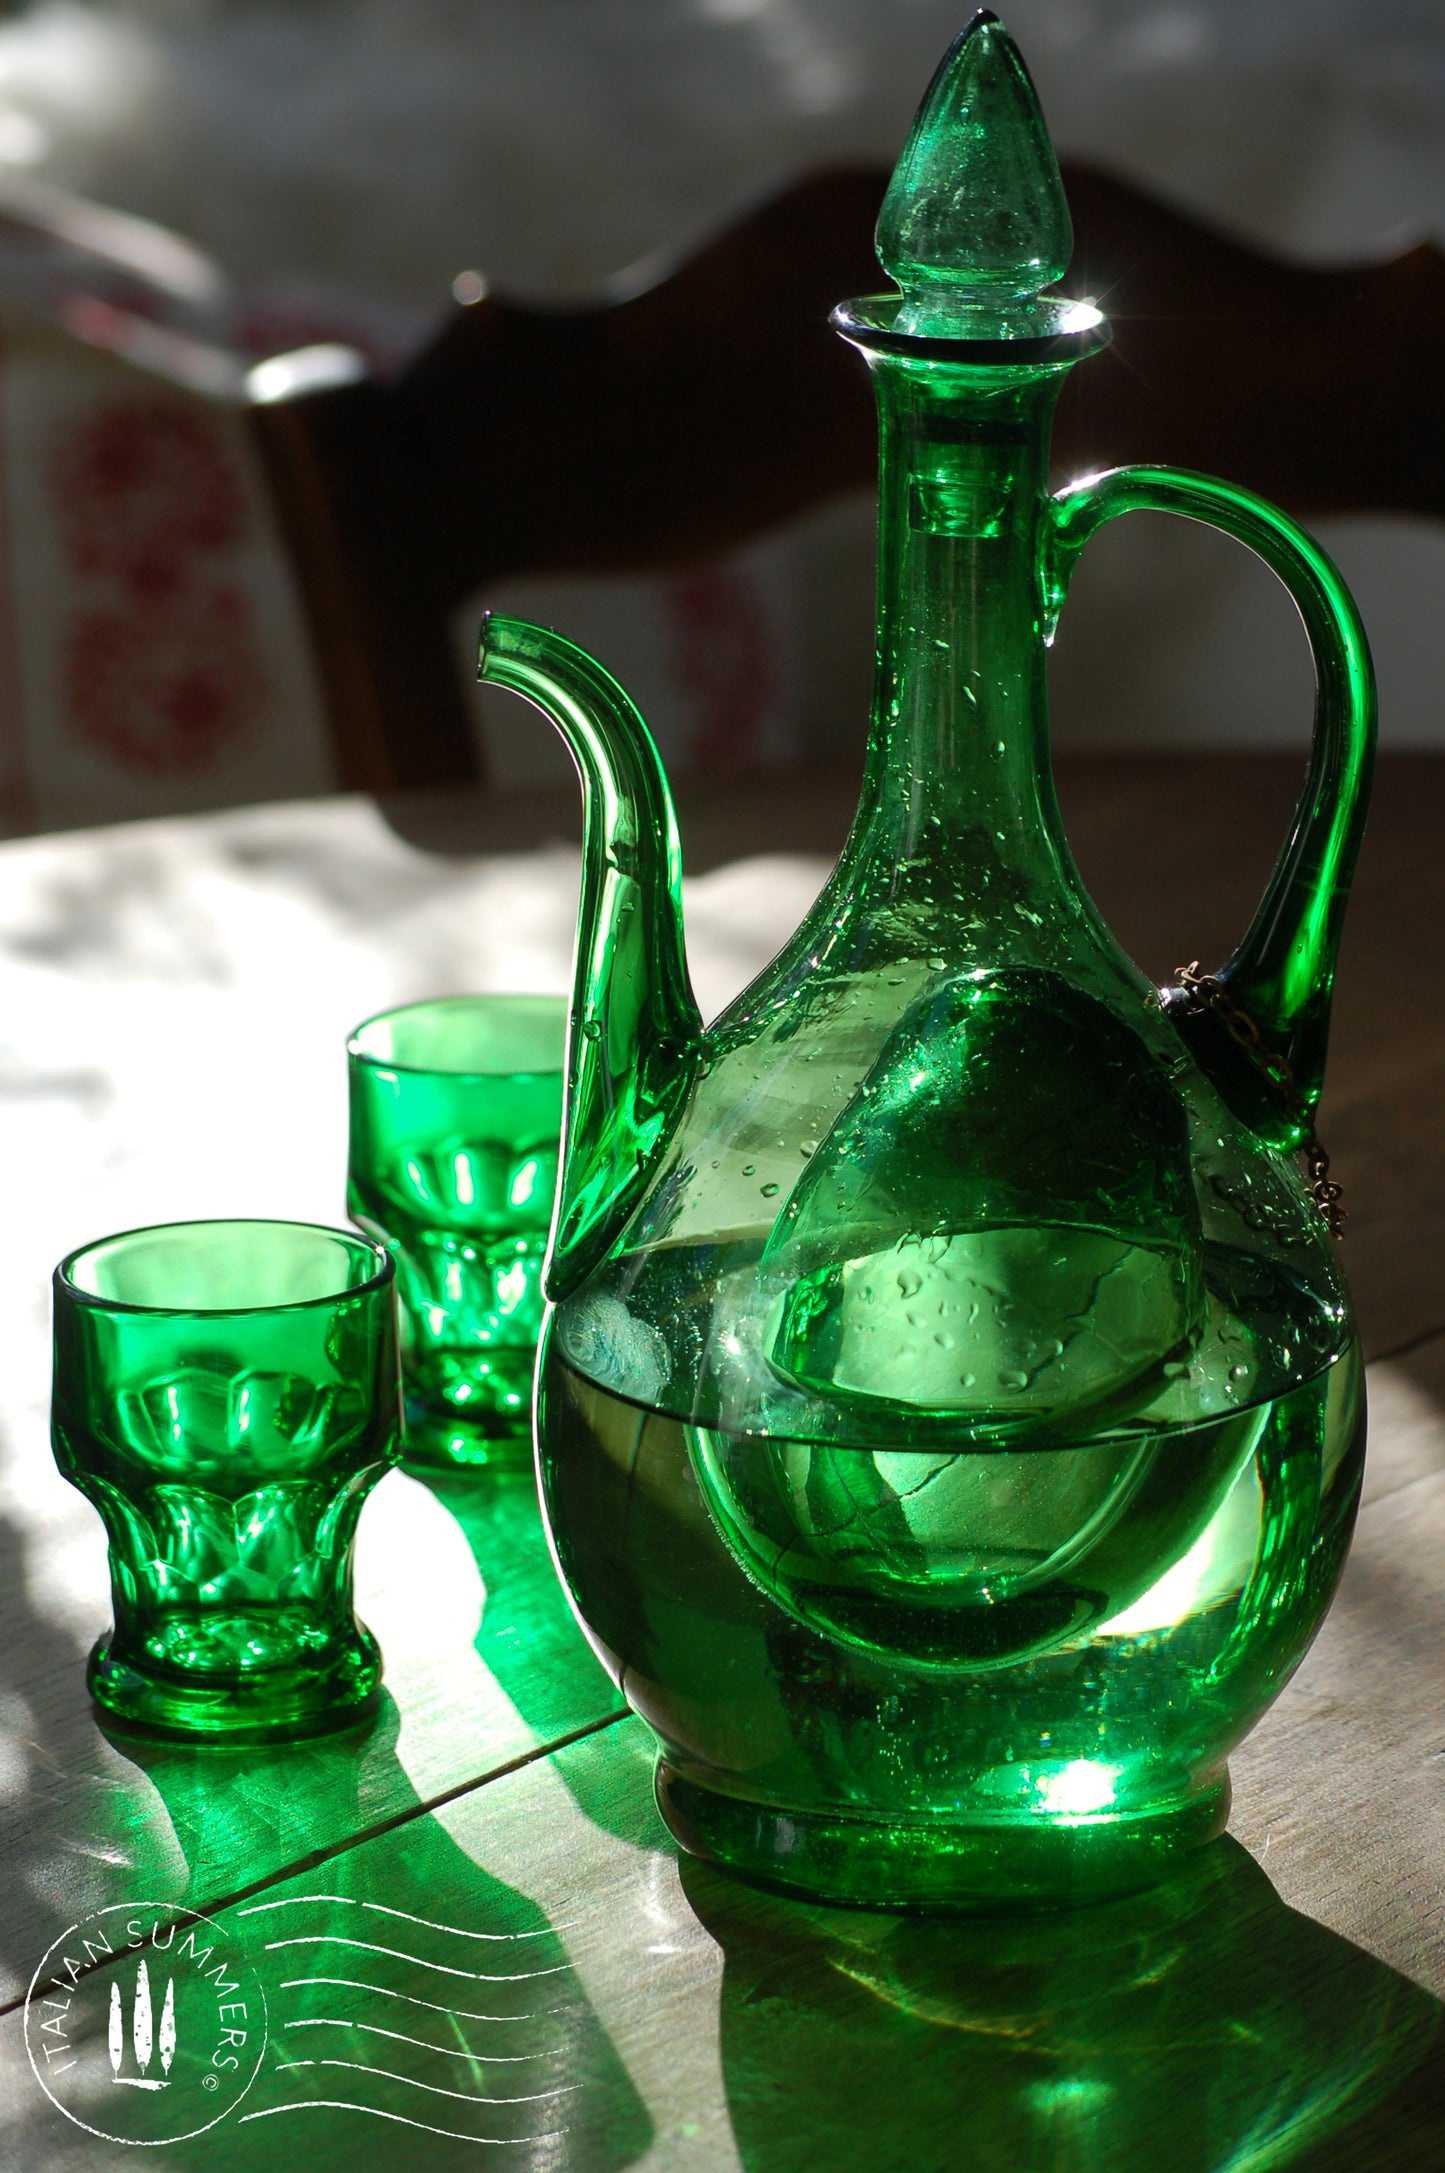 A beautiful emerald green Empoli glass decanter from the 1960s Italy. It resembles a large teardrop with a spout  and a handle, made of hand-blown green glass. It has an inner chamber built-in  for ice cubes that will chill the wine without diluting it.  A small work of Art, Italian Style